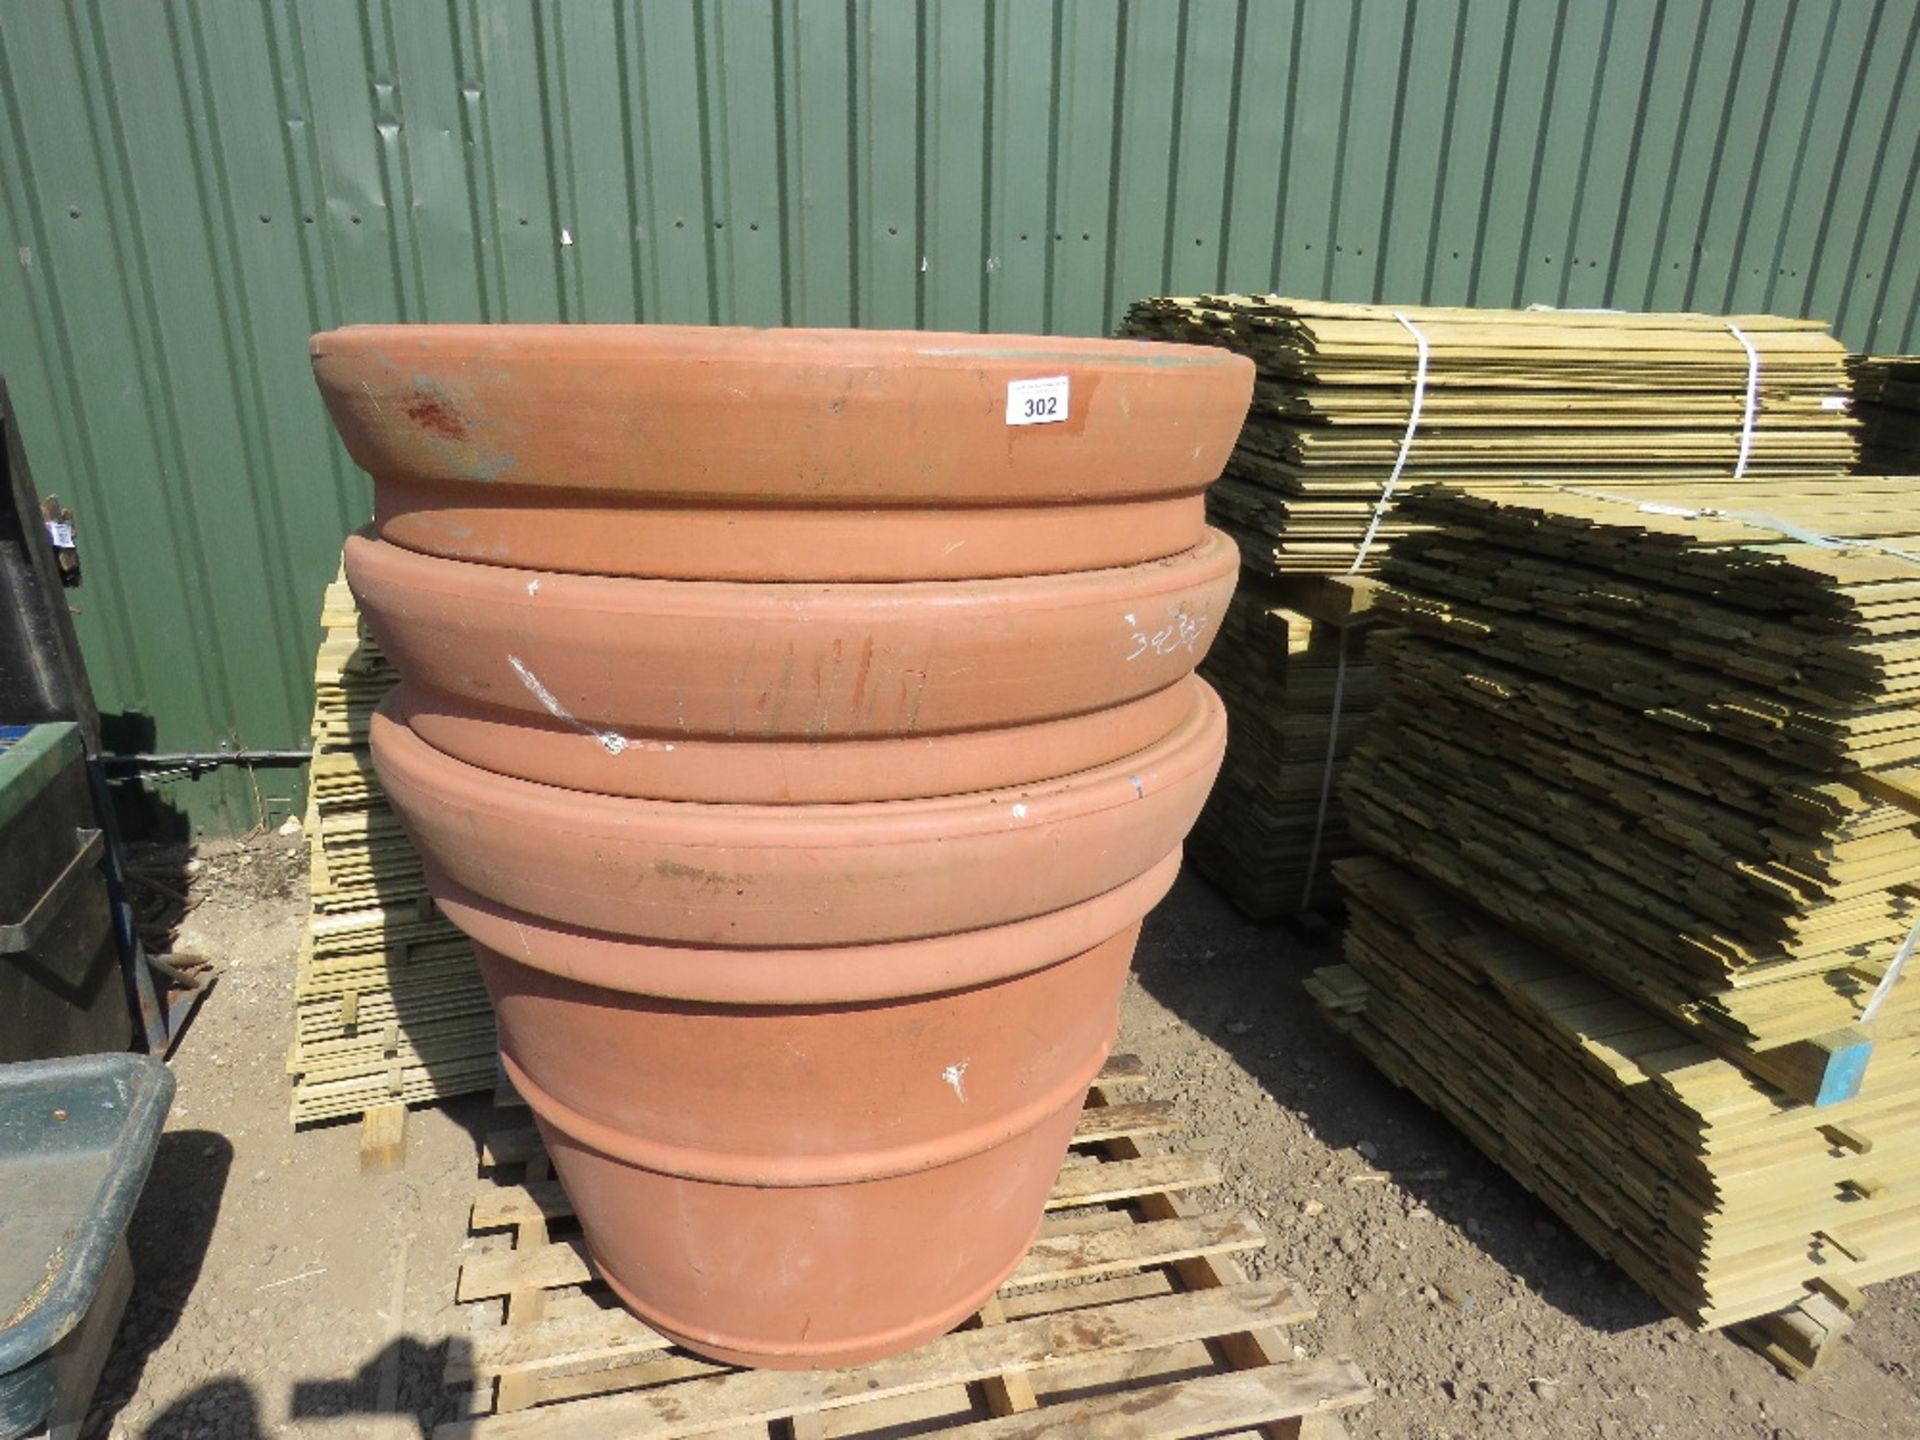 3 X EXTRA LARGE PLASTIC PLANT POTS 87CM HEIGHT X 110CM DIAMETER APPROX, PLUS SOME OTHERS INSIDE.